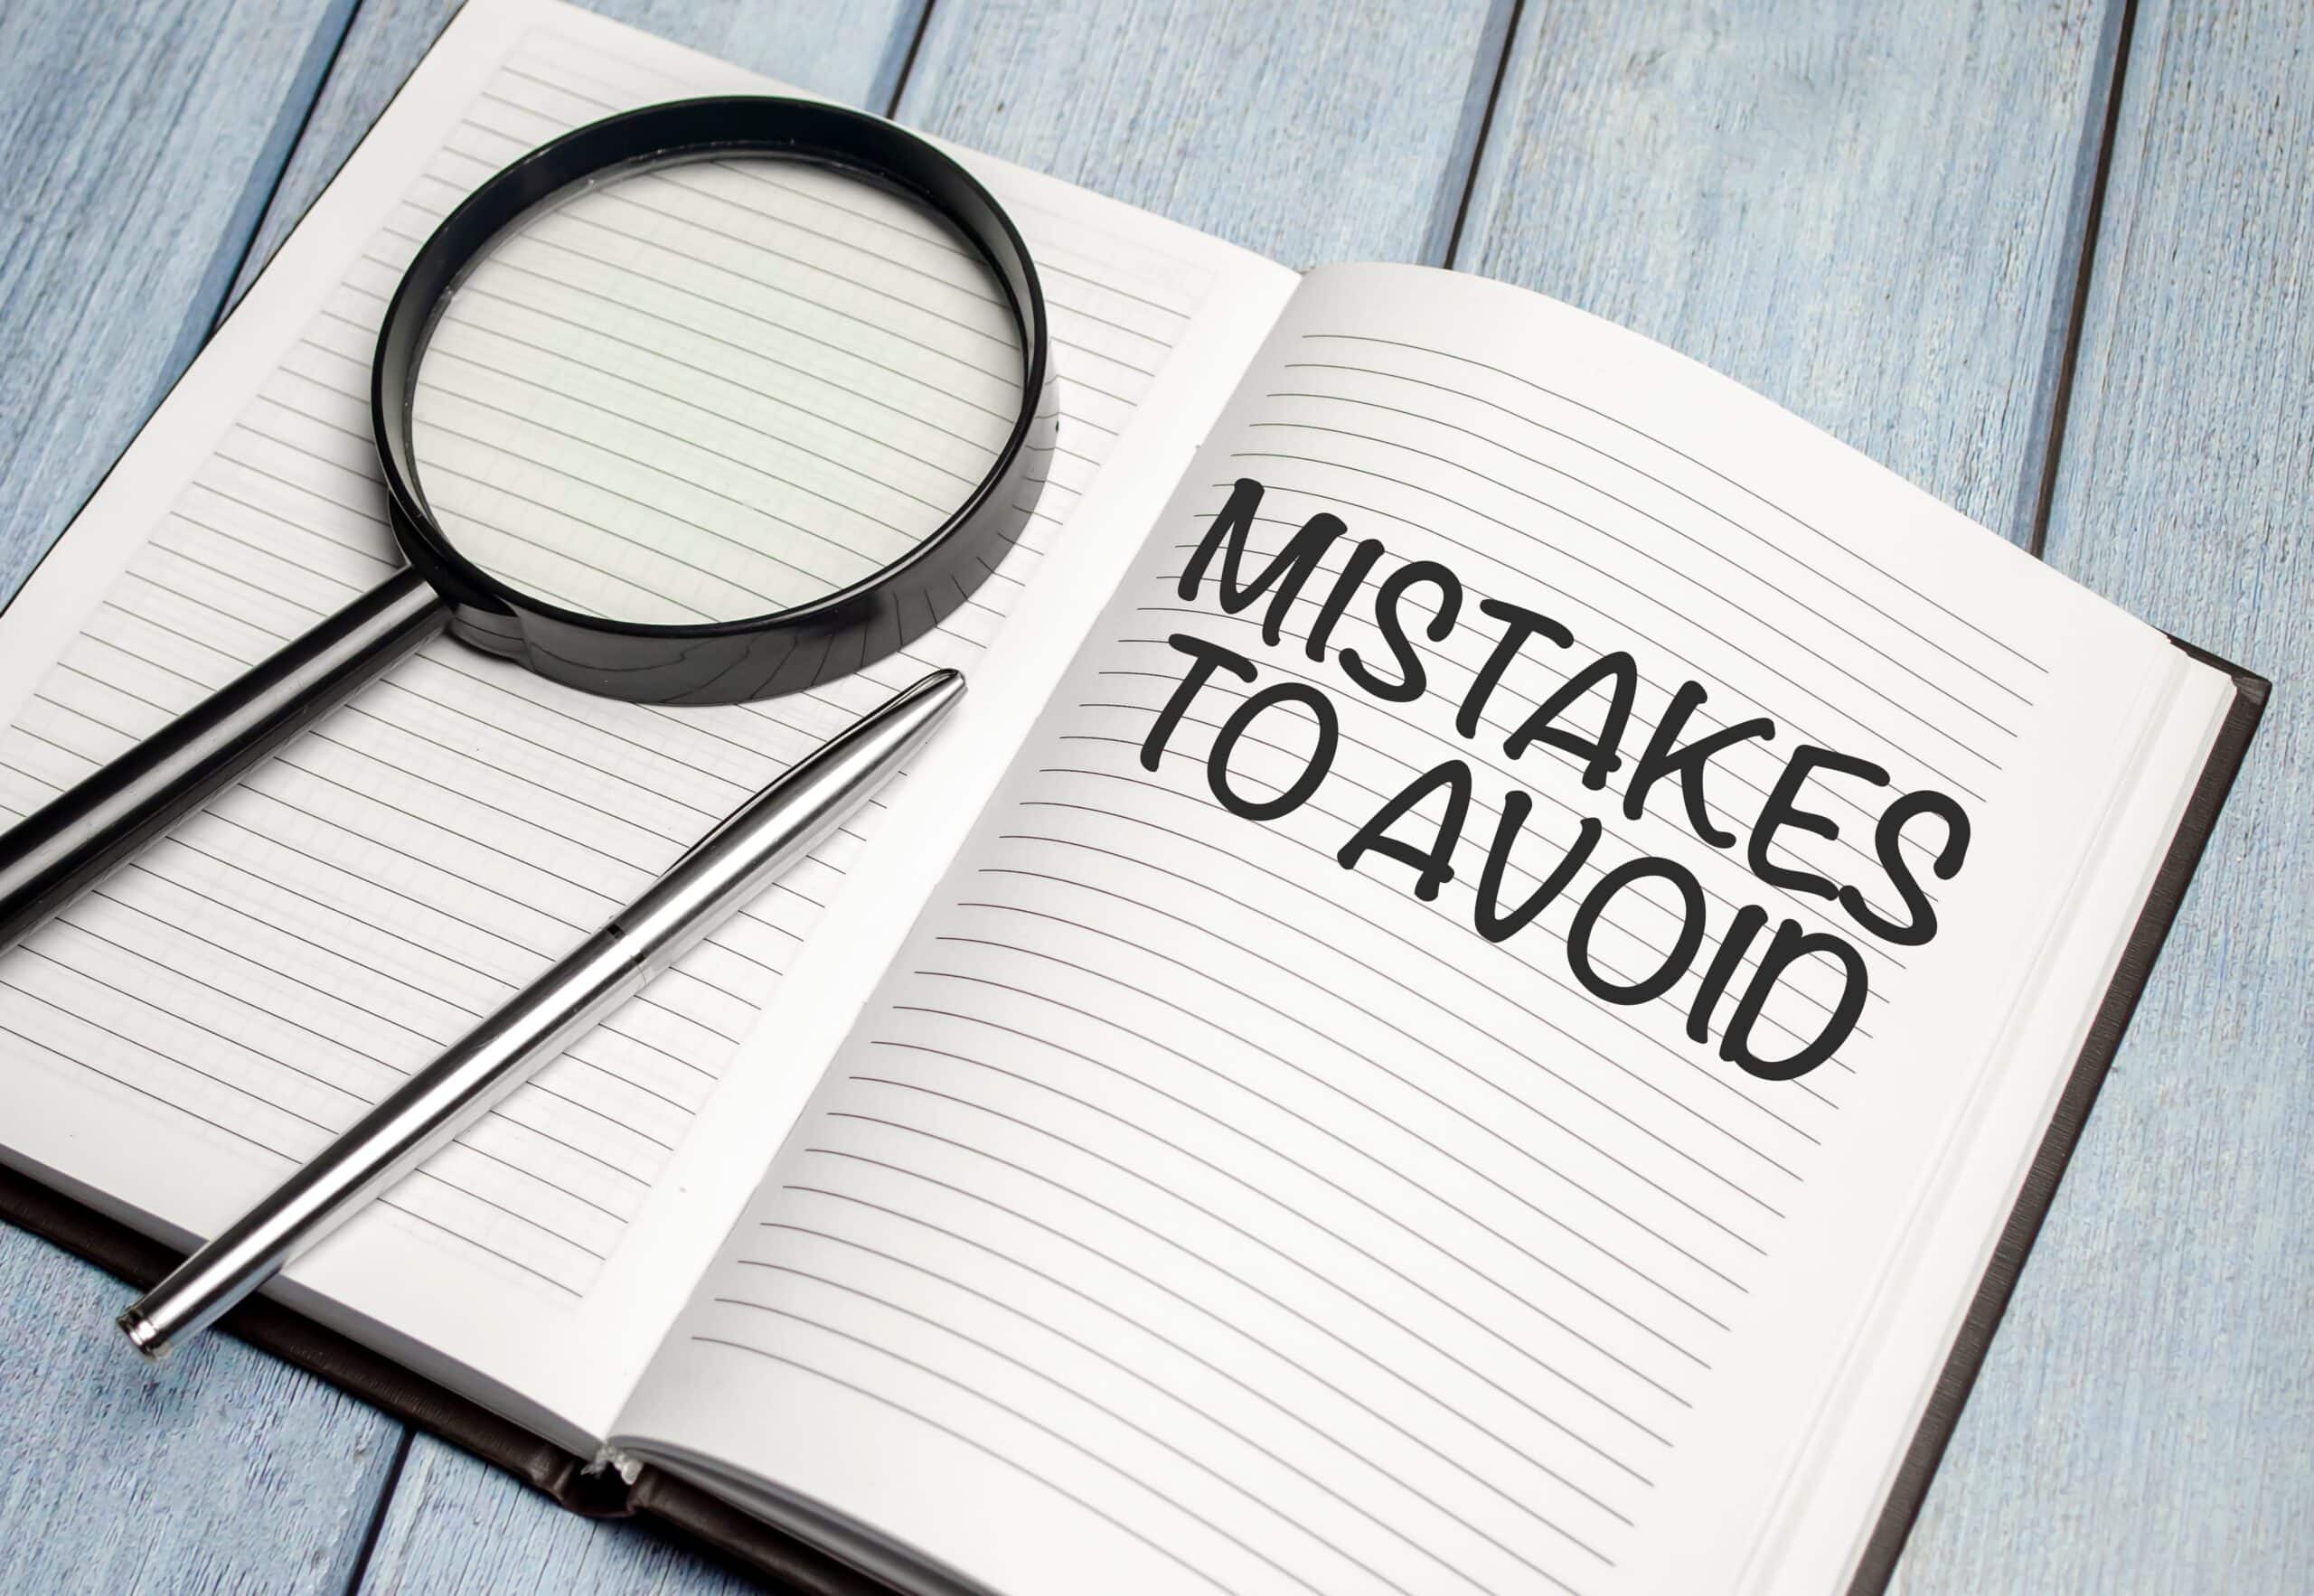 Avoid These 5 Top Mailing Mistakes